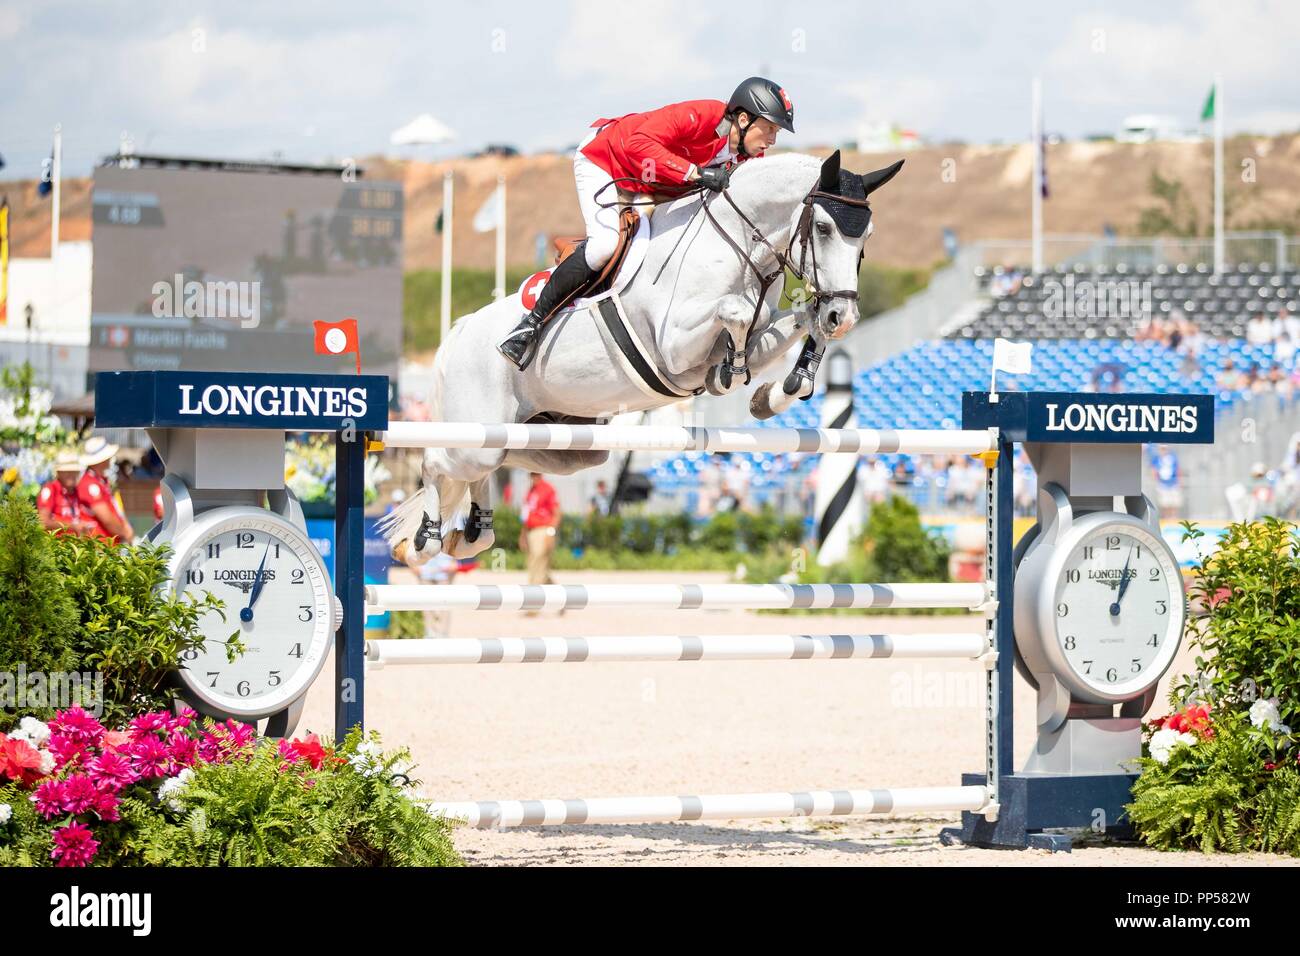 North Carolina, USA. 23rd Sept 2018. Martin Fuchs. Clooney. SUI. Show Jumping FEI World Individual Jumping Championship. Day 12. World Equestrian Games. WEG 2018 Tryon. North Carolina. USA. 23/09/2018. Credit: Sport In Pictures/Alamy Live News Stock Photo